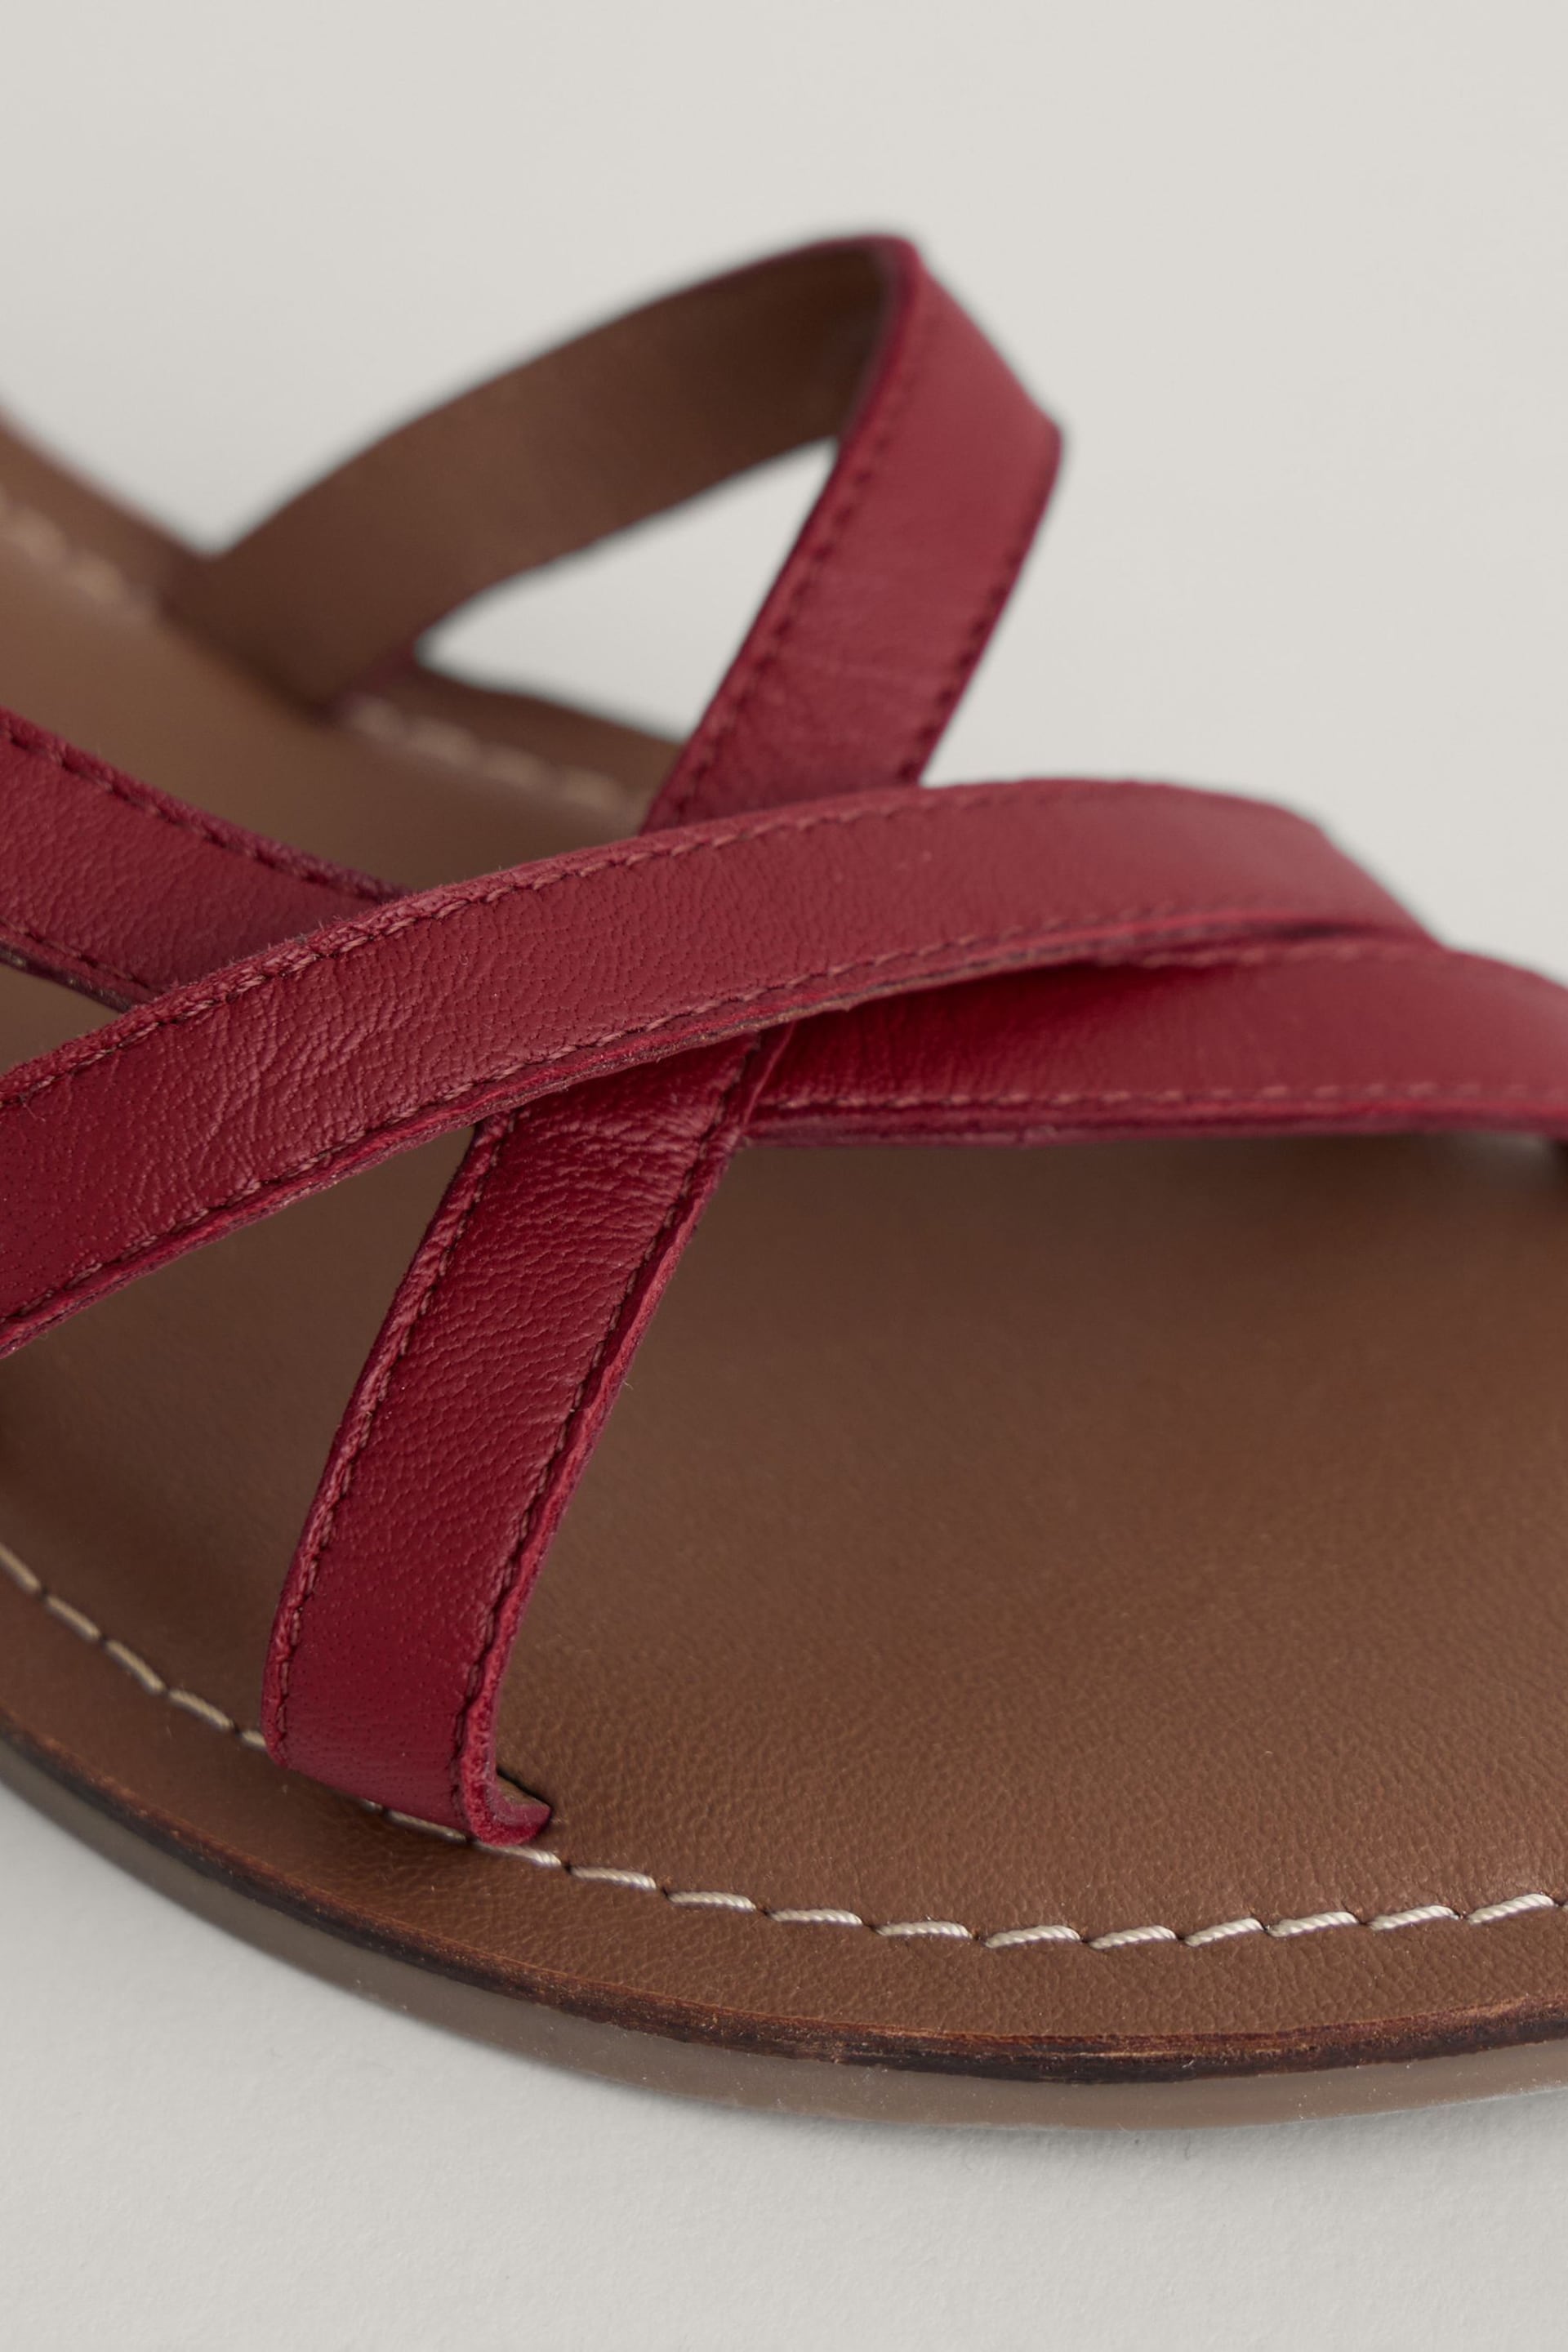 Seasalt Cornwall Red Sea Step Strappy Leather Sandals - Image 4 of 5